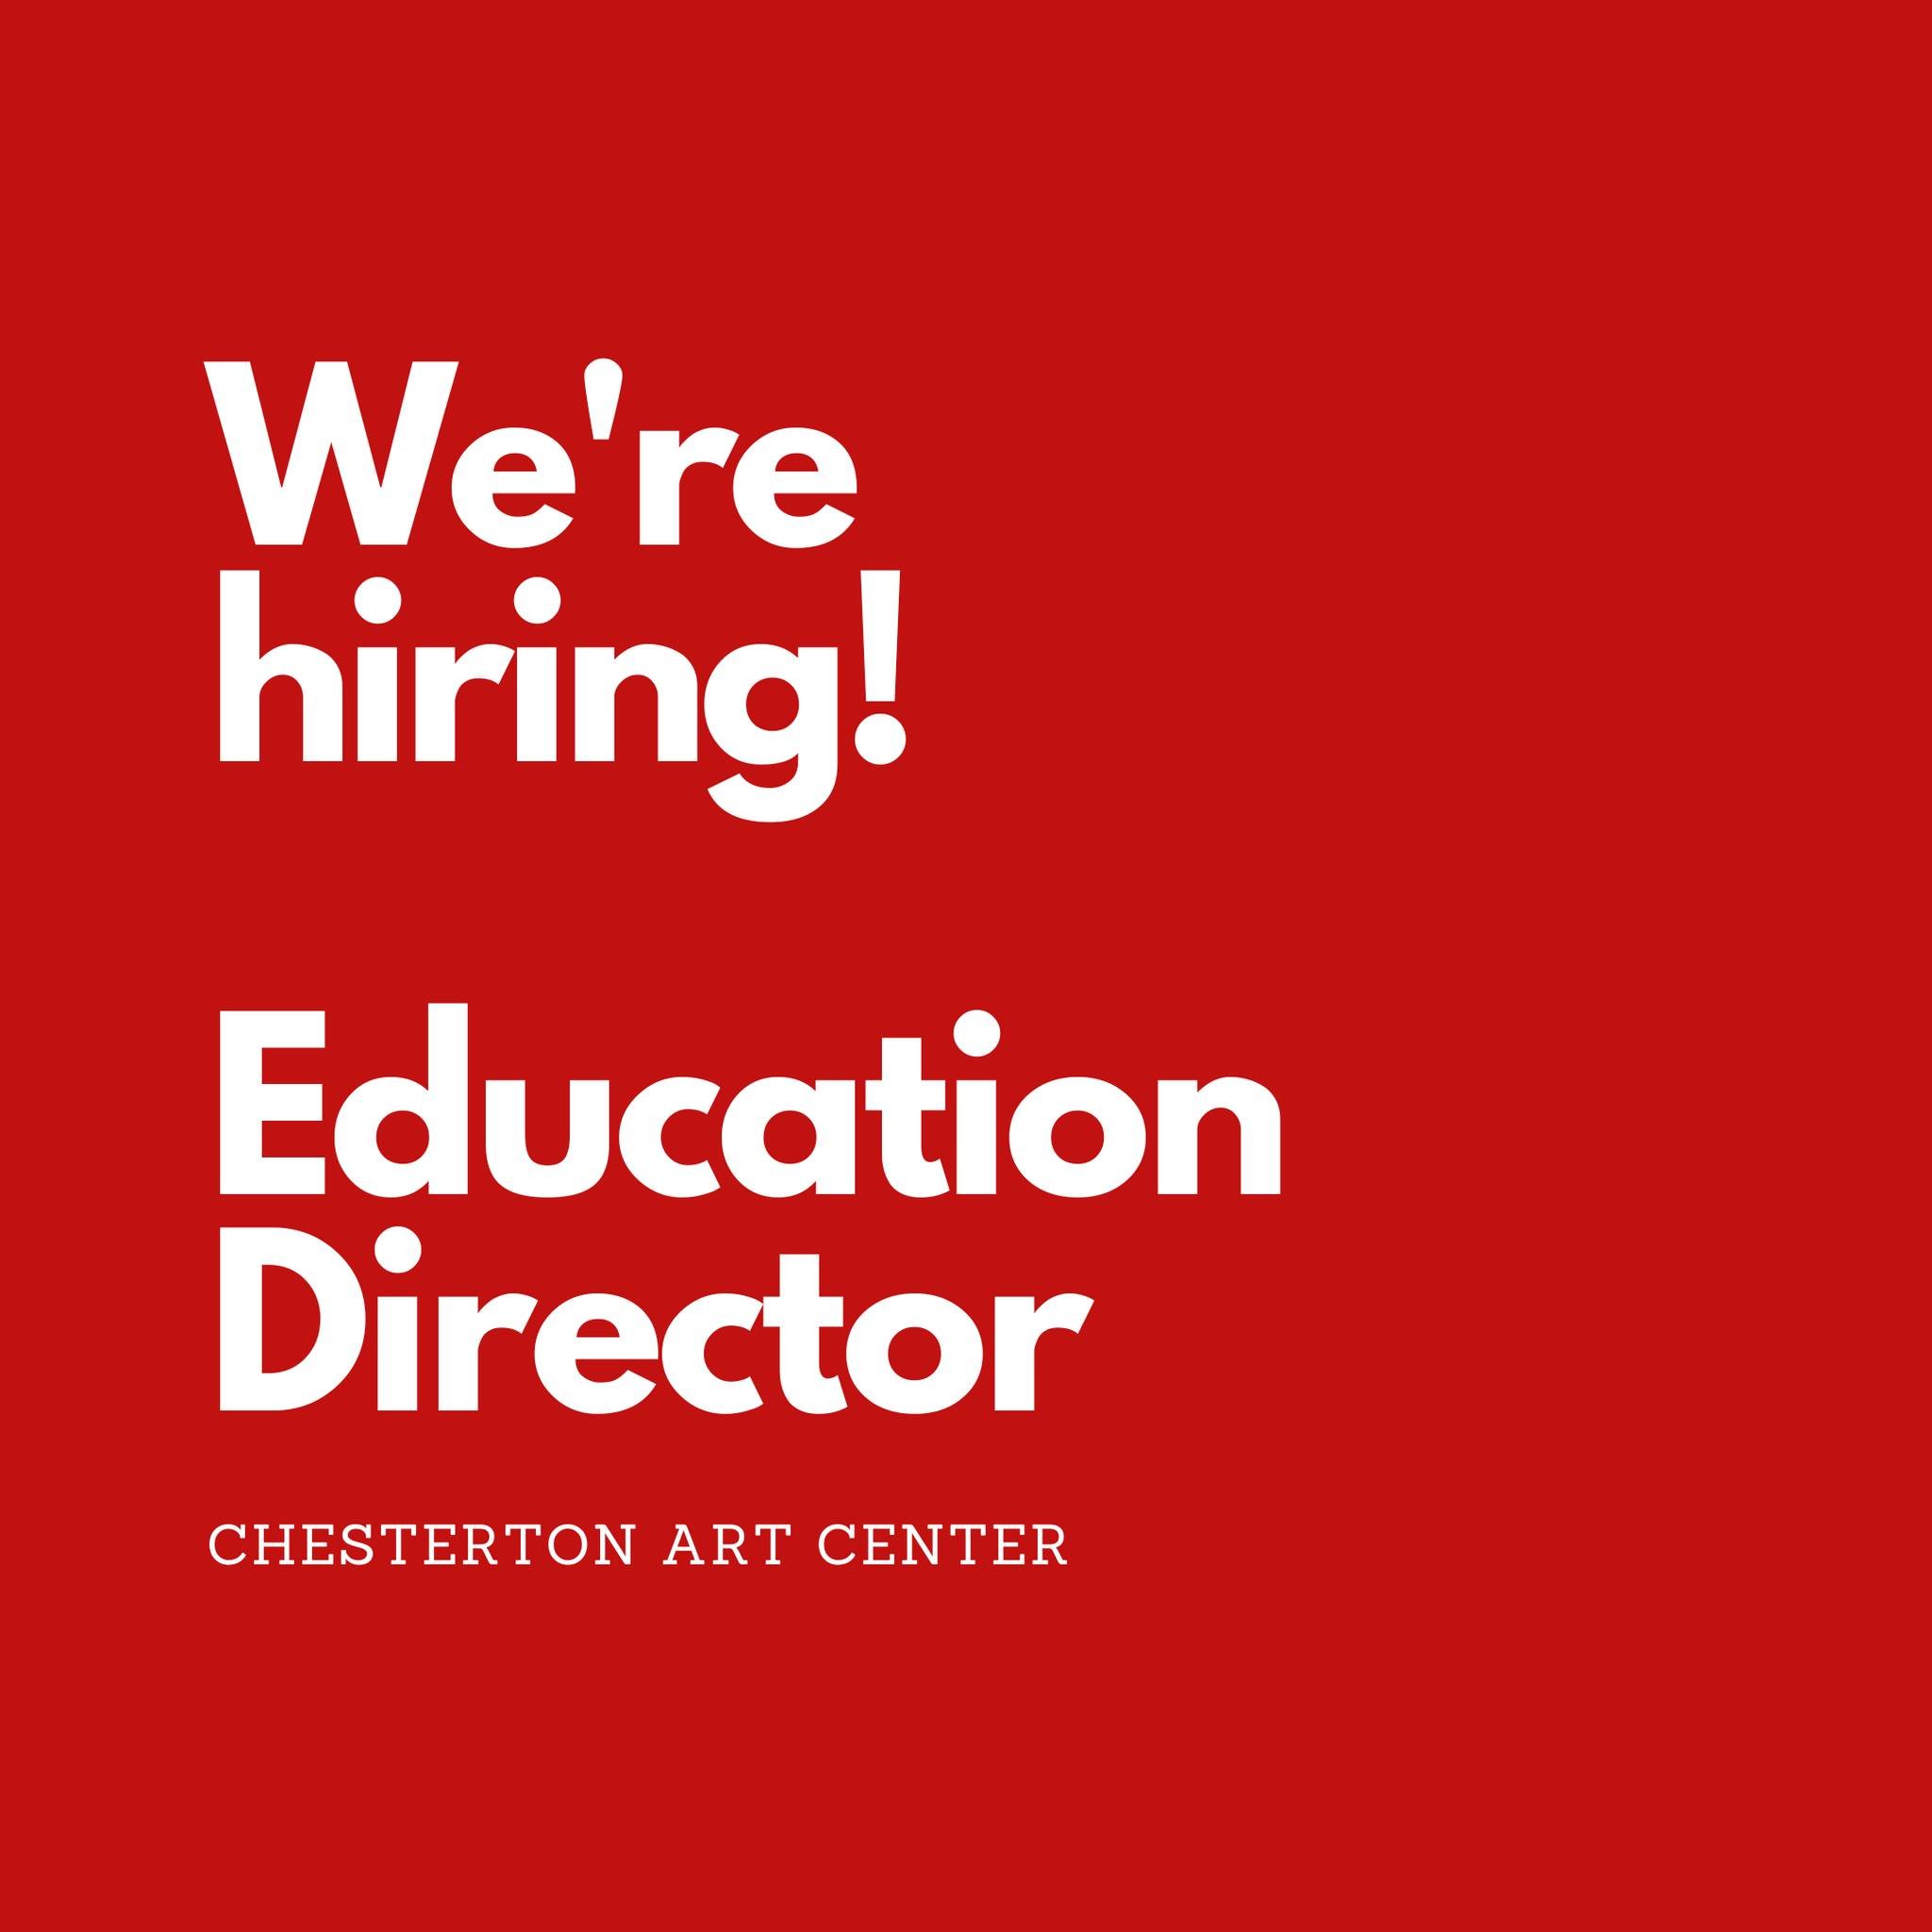 We're Hiring! CAC is looking for a new Education Director.

We are seeking an Education Director who will implement and oversee the breadth of in-house and outreach visual arts education programs that make us who we are and fulfill our mission of bui